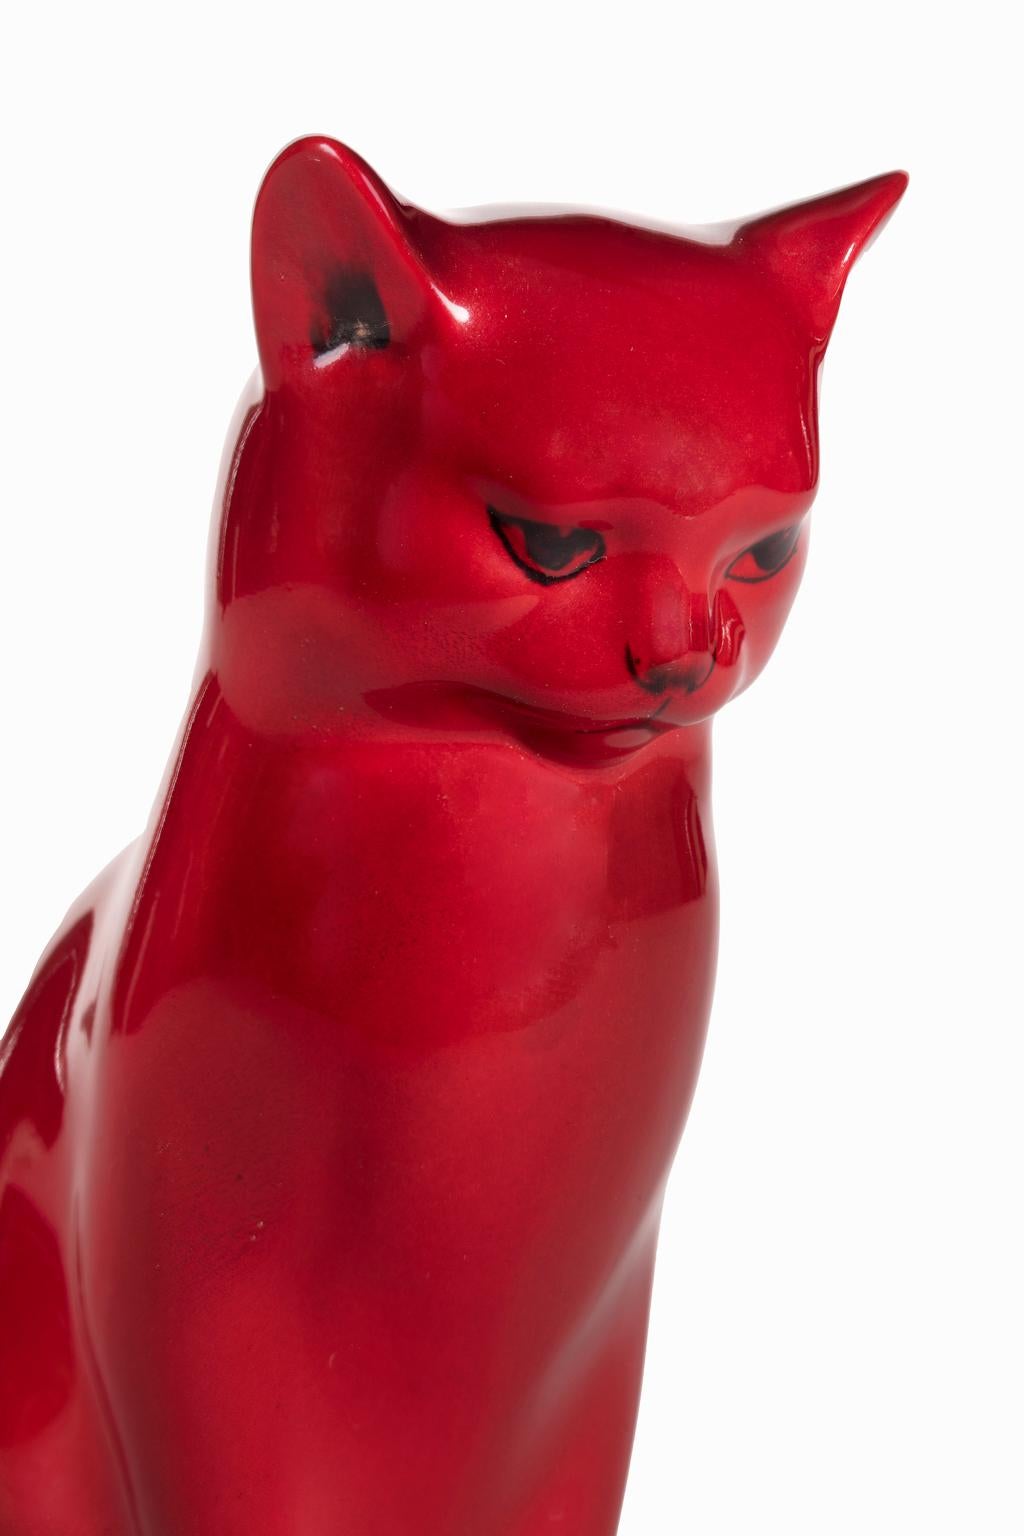 Royal Doulton Red Flambe Porcelain Figurine 